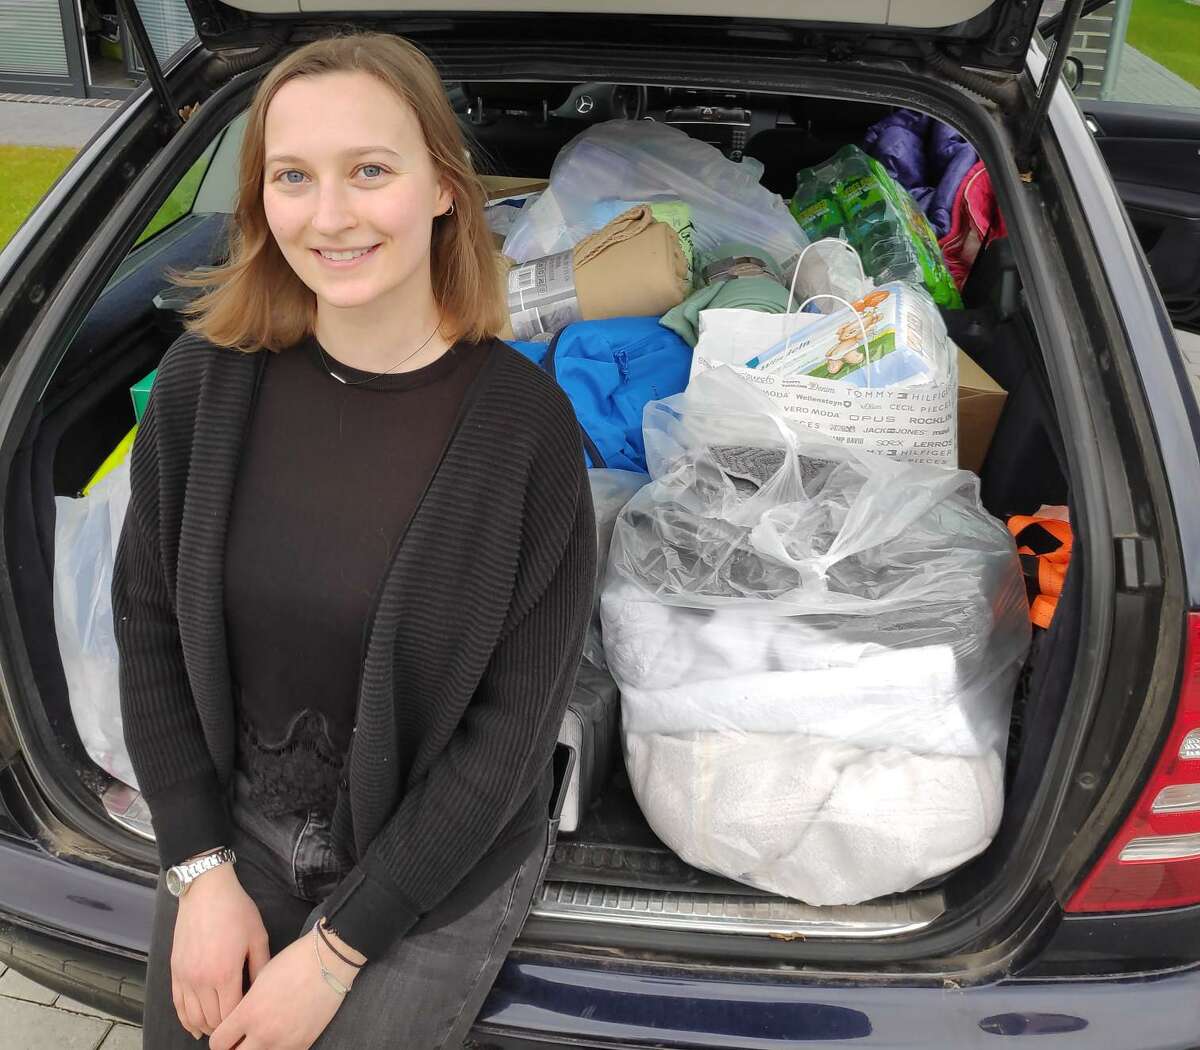 Emily Kilgannon-Neumann, a Fairfield Warde graduate, lives in Germany and is helping Ukrainian refugees fleeing the war by participating in relief convoys.